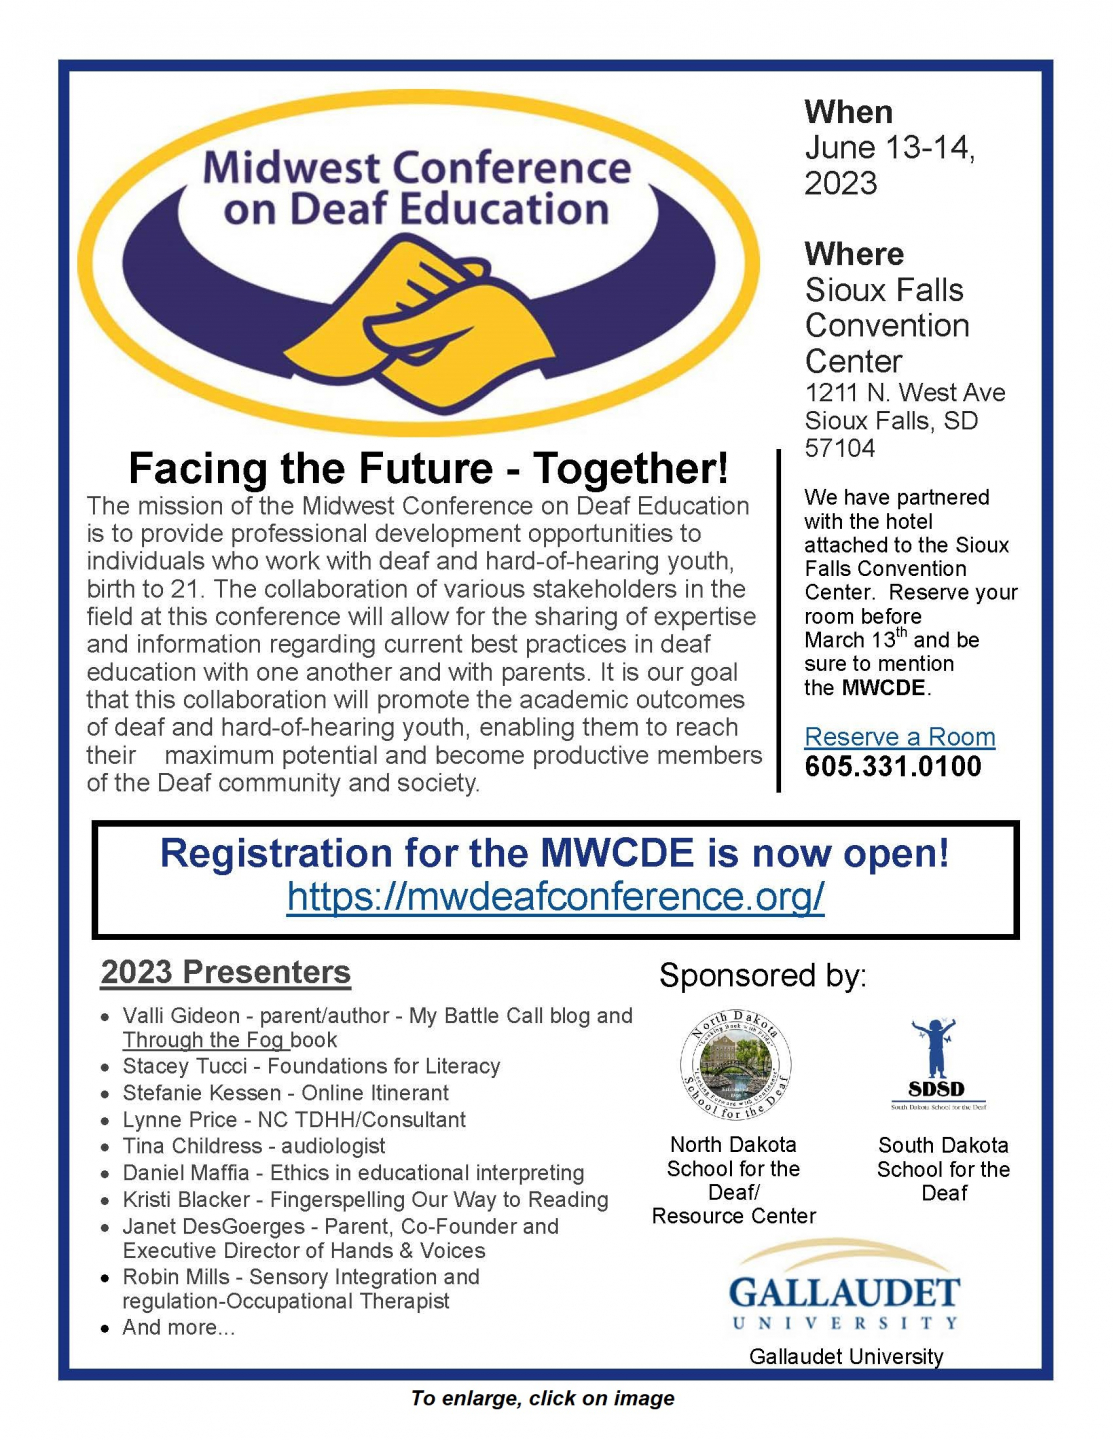 Midwest Conference Deaf Education flyer announcing 2023 Summer Conference